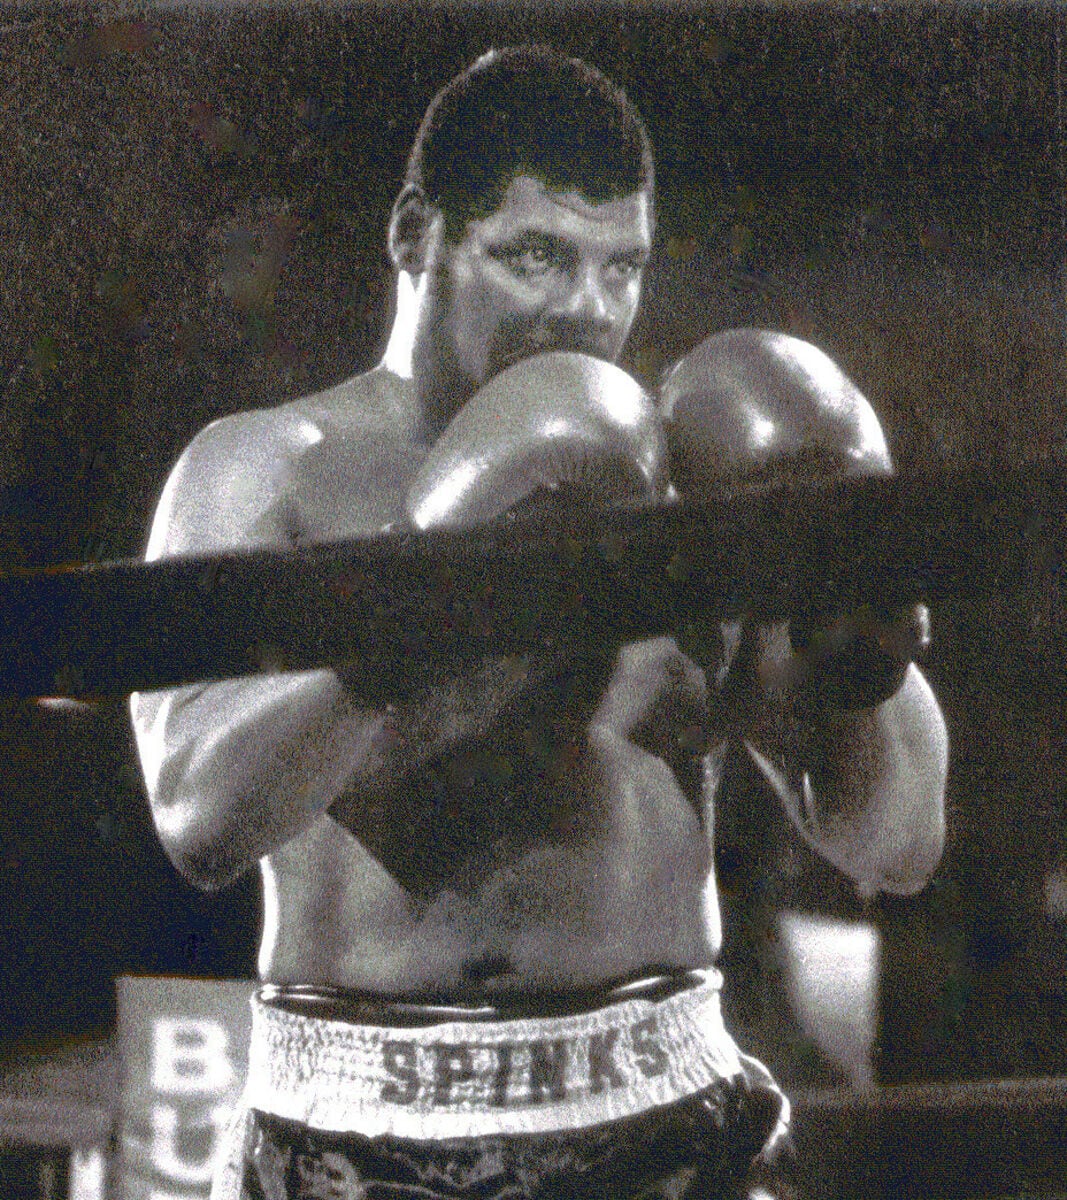 Leon Spinks - Famous Actor